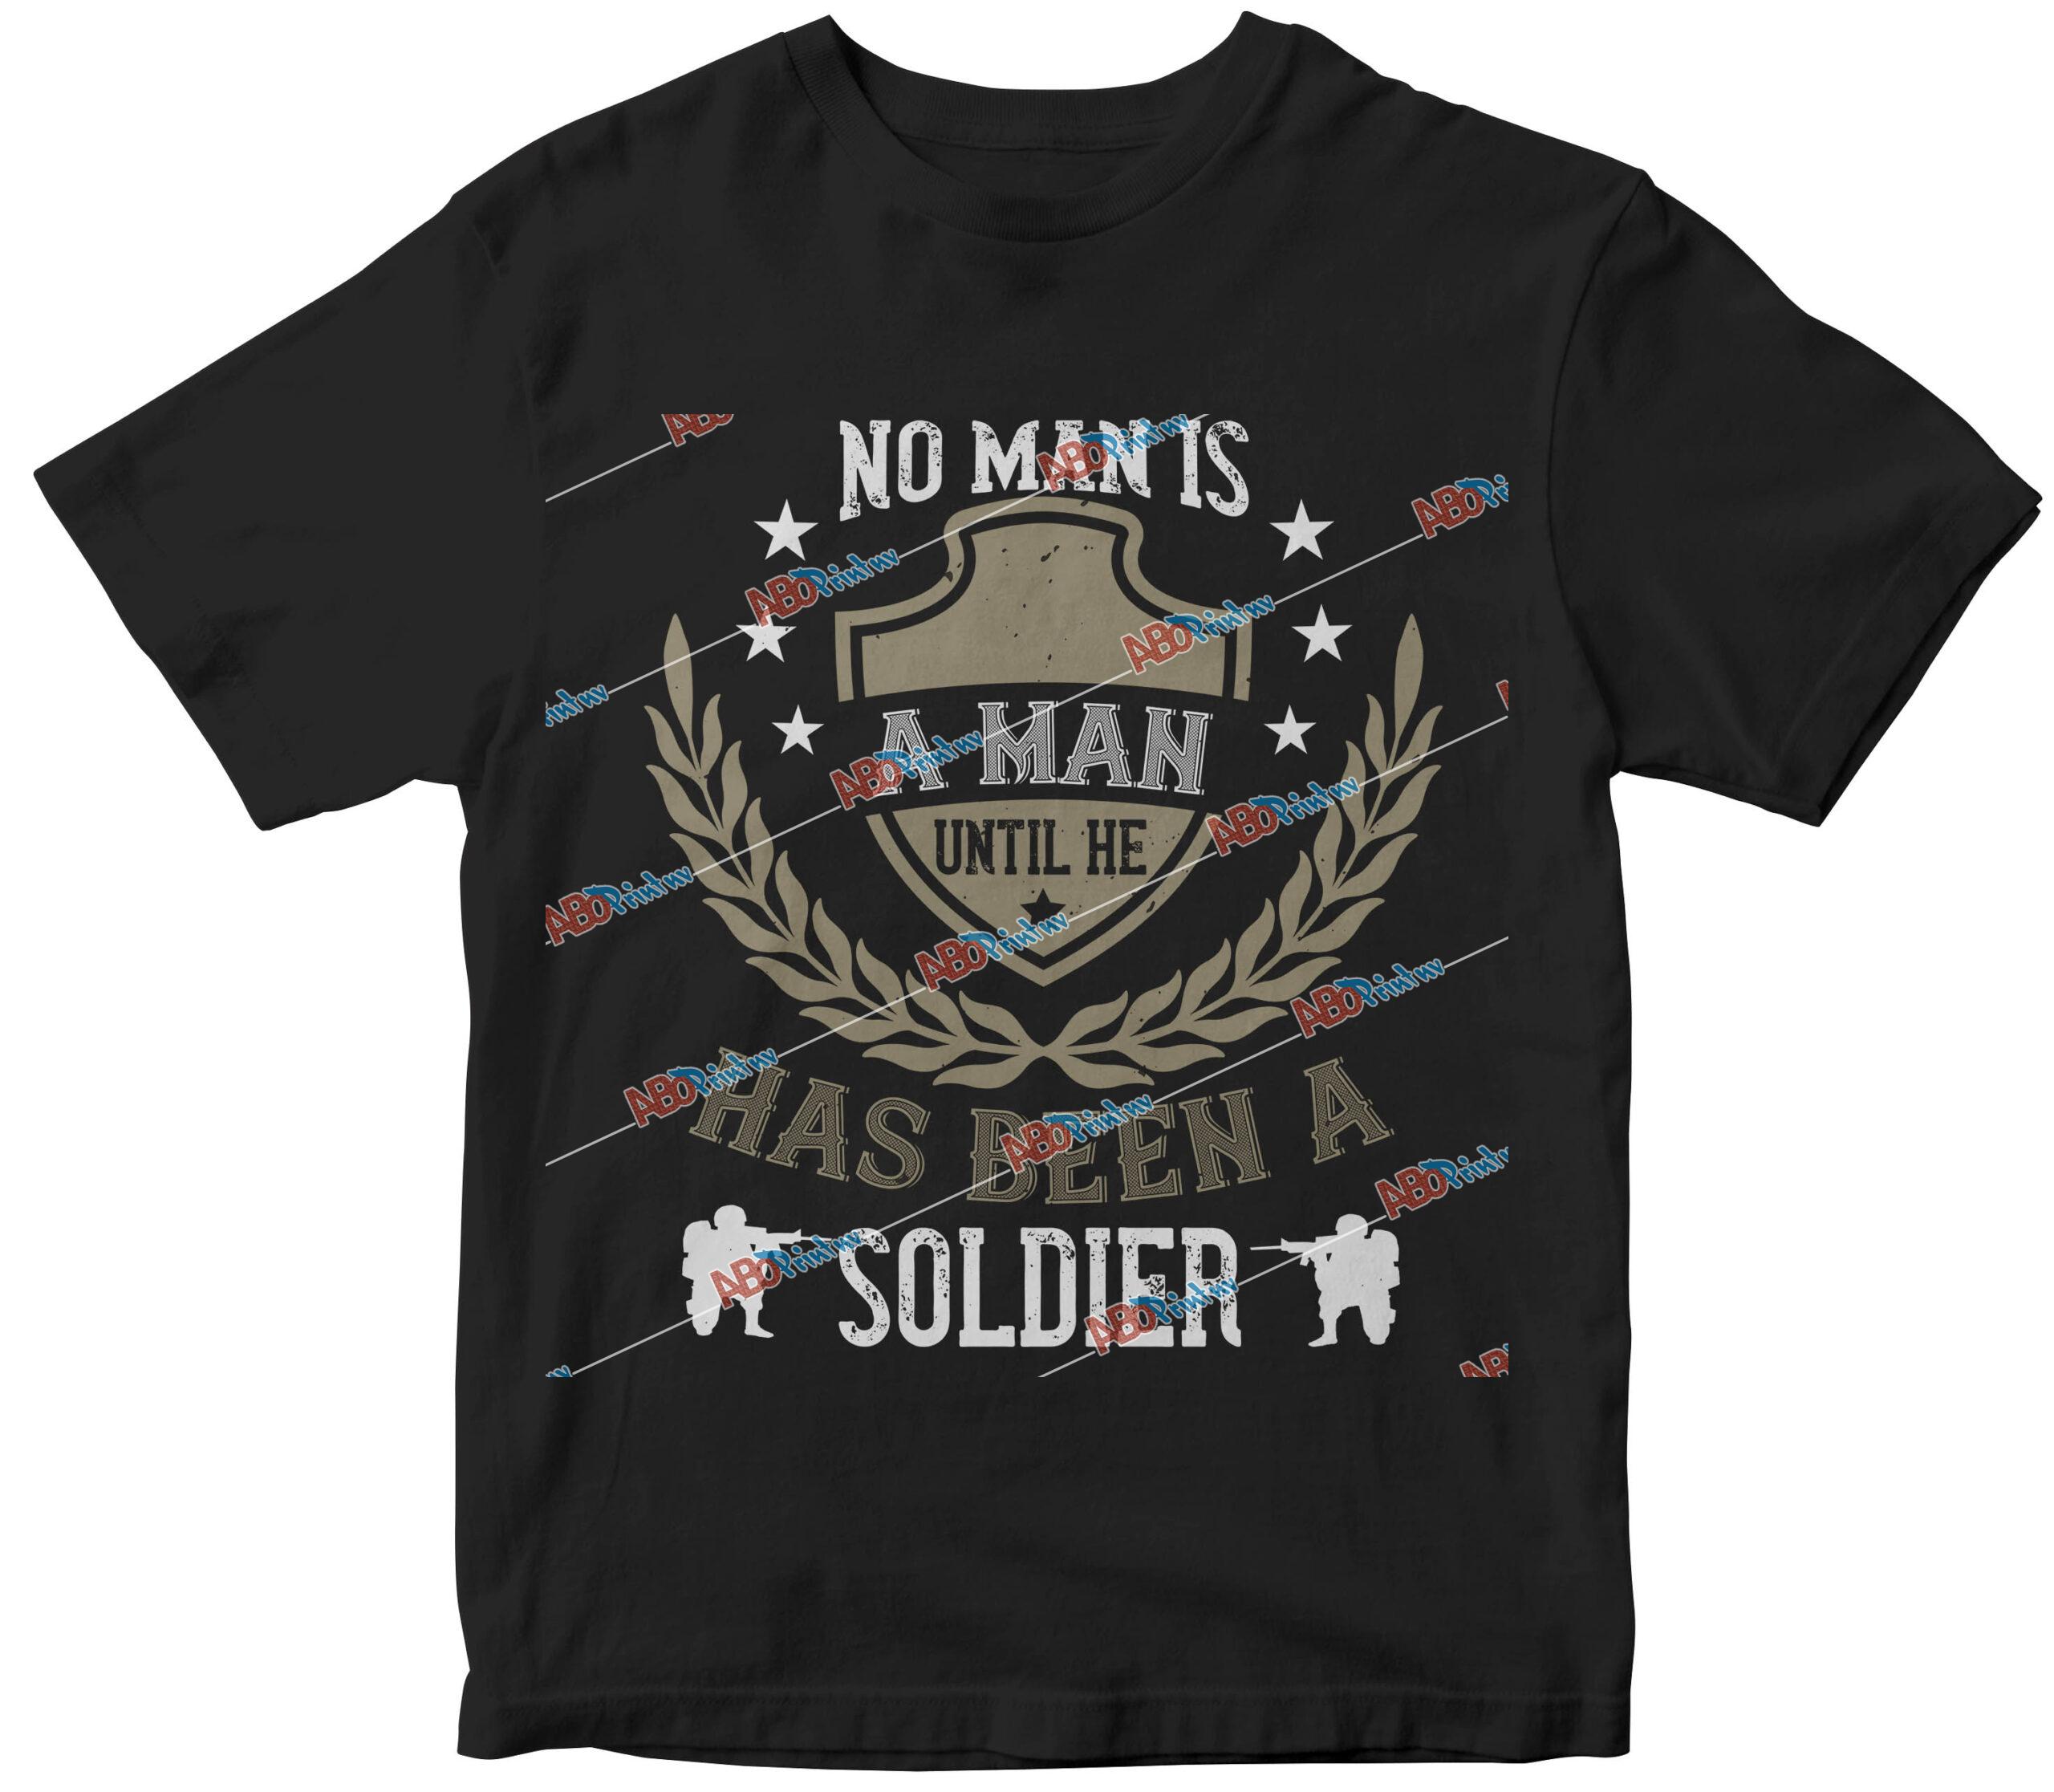 No man is a man until he has been a soldier.jpg